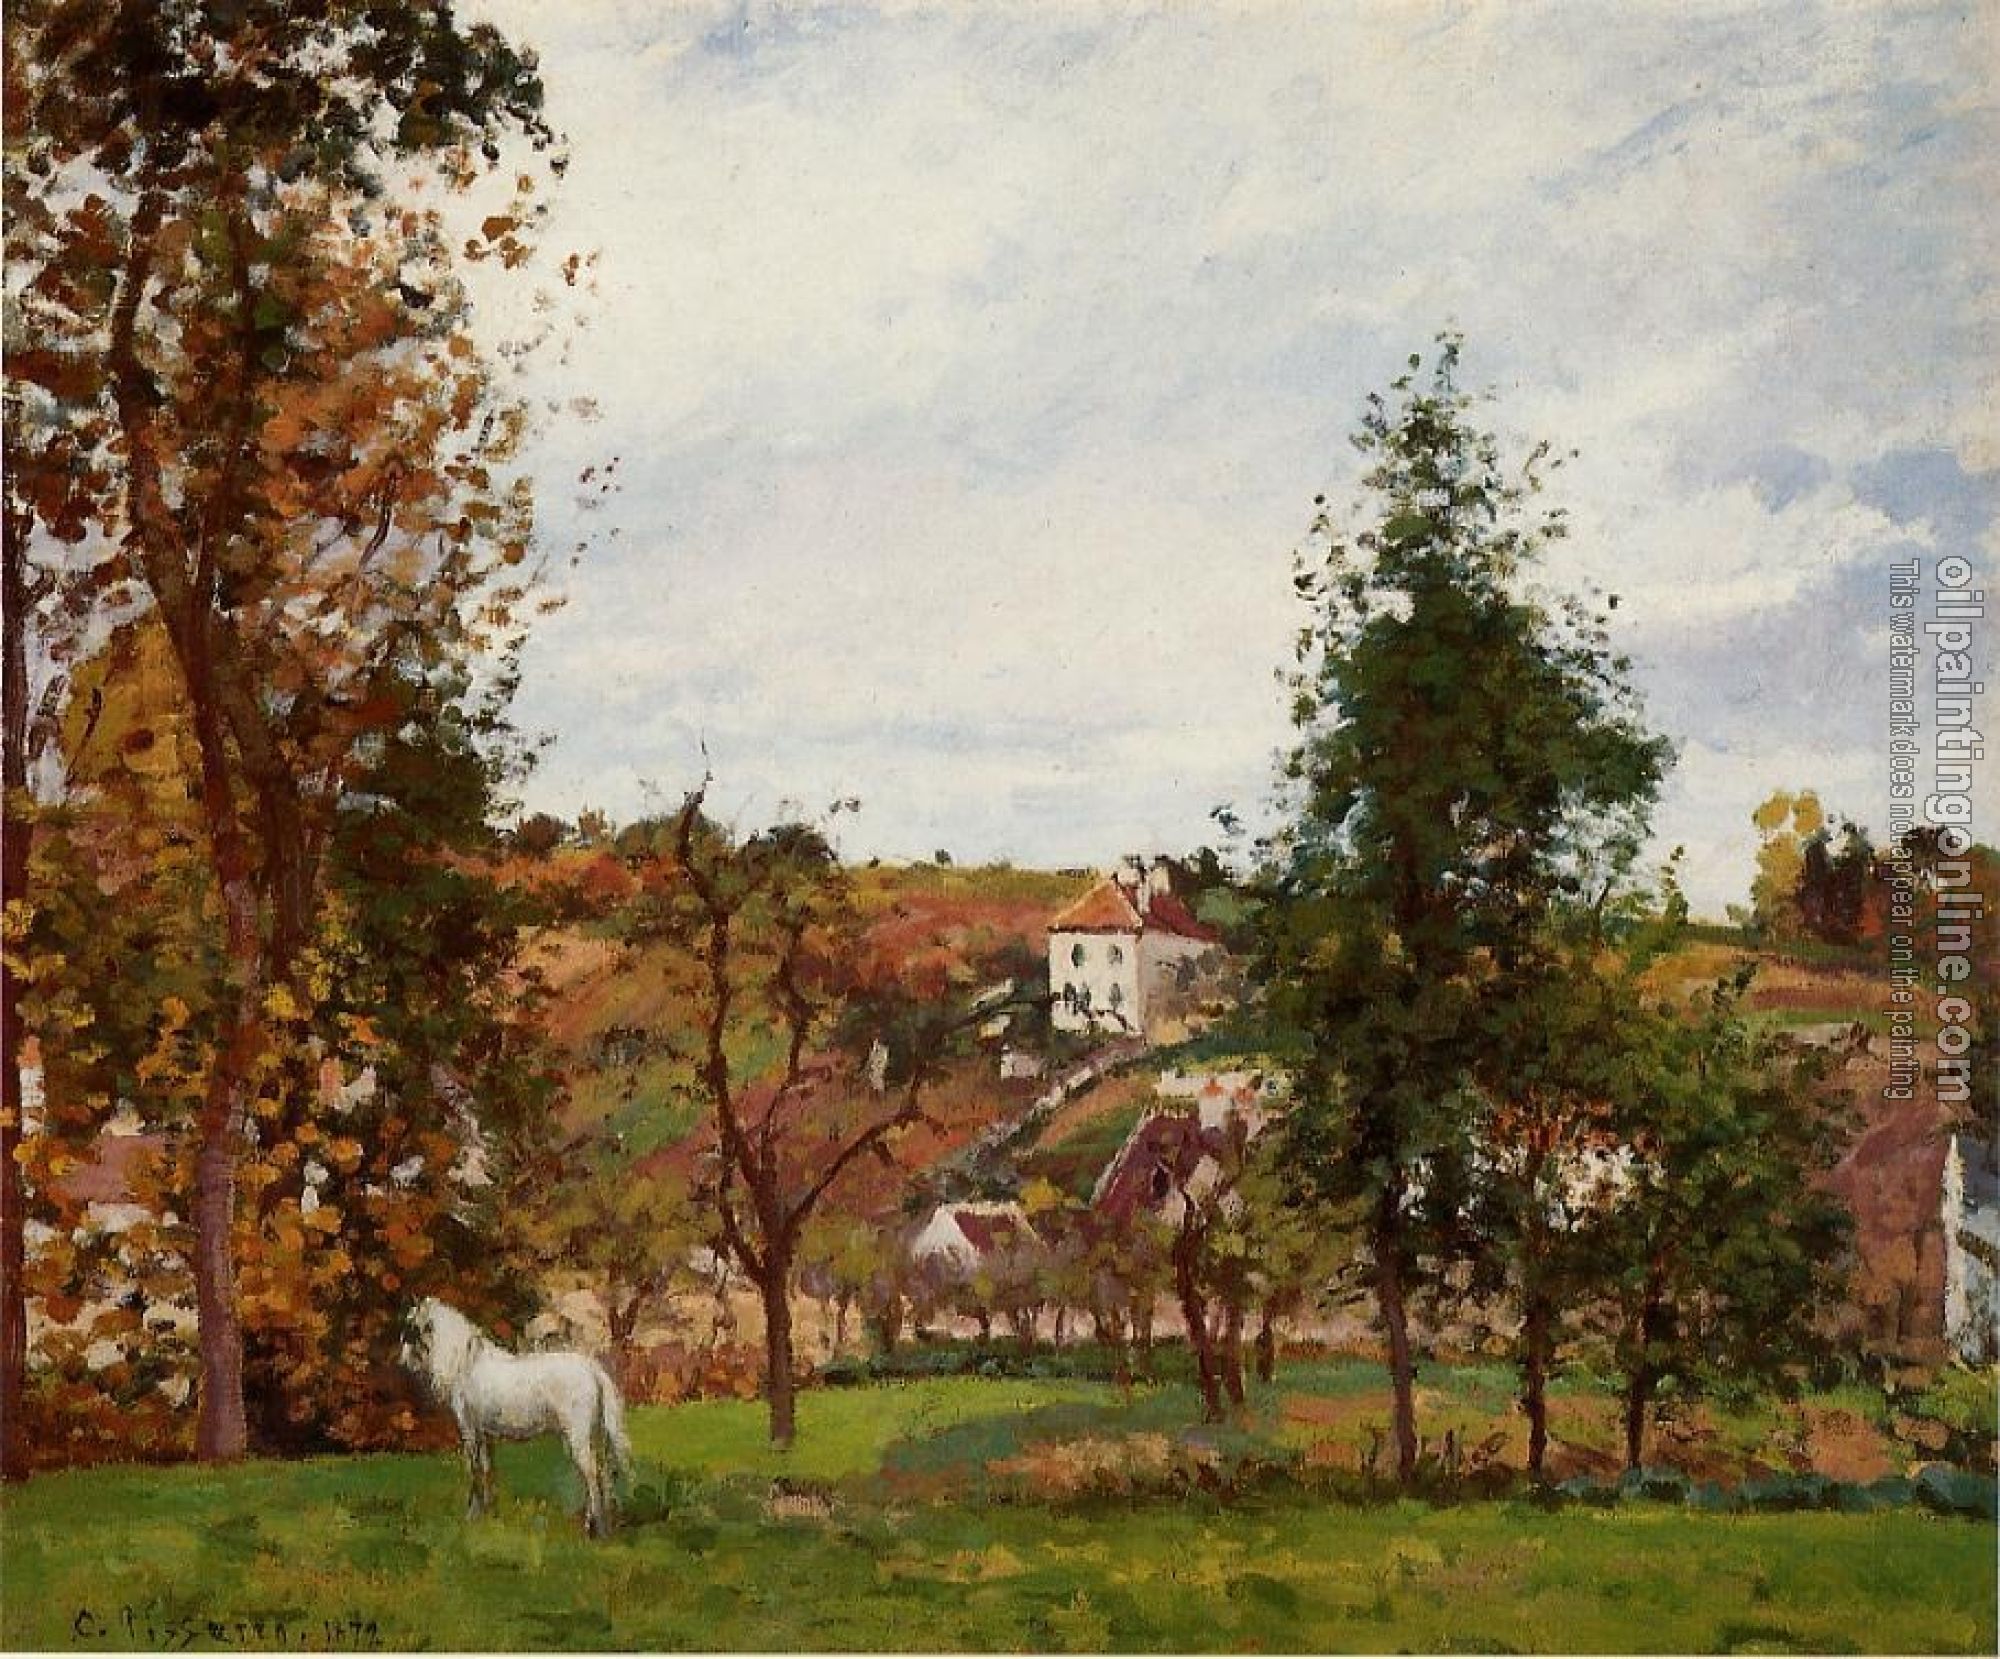 Pissarro, Camille - Landscape with a White Horse in a Meadow, L'Hermitage